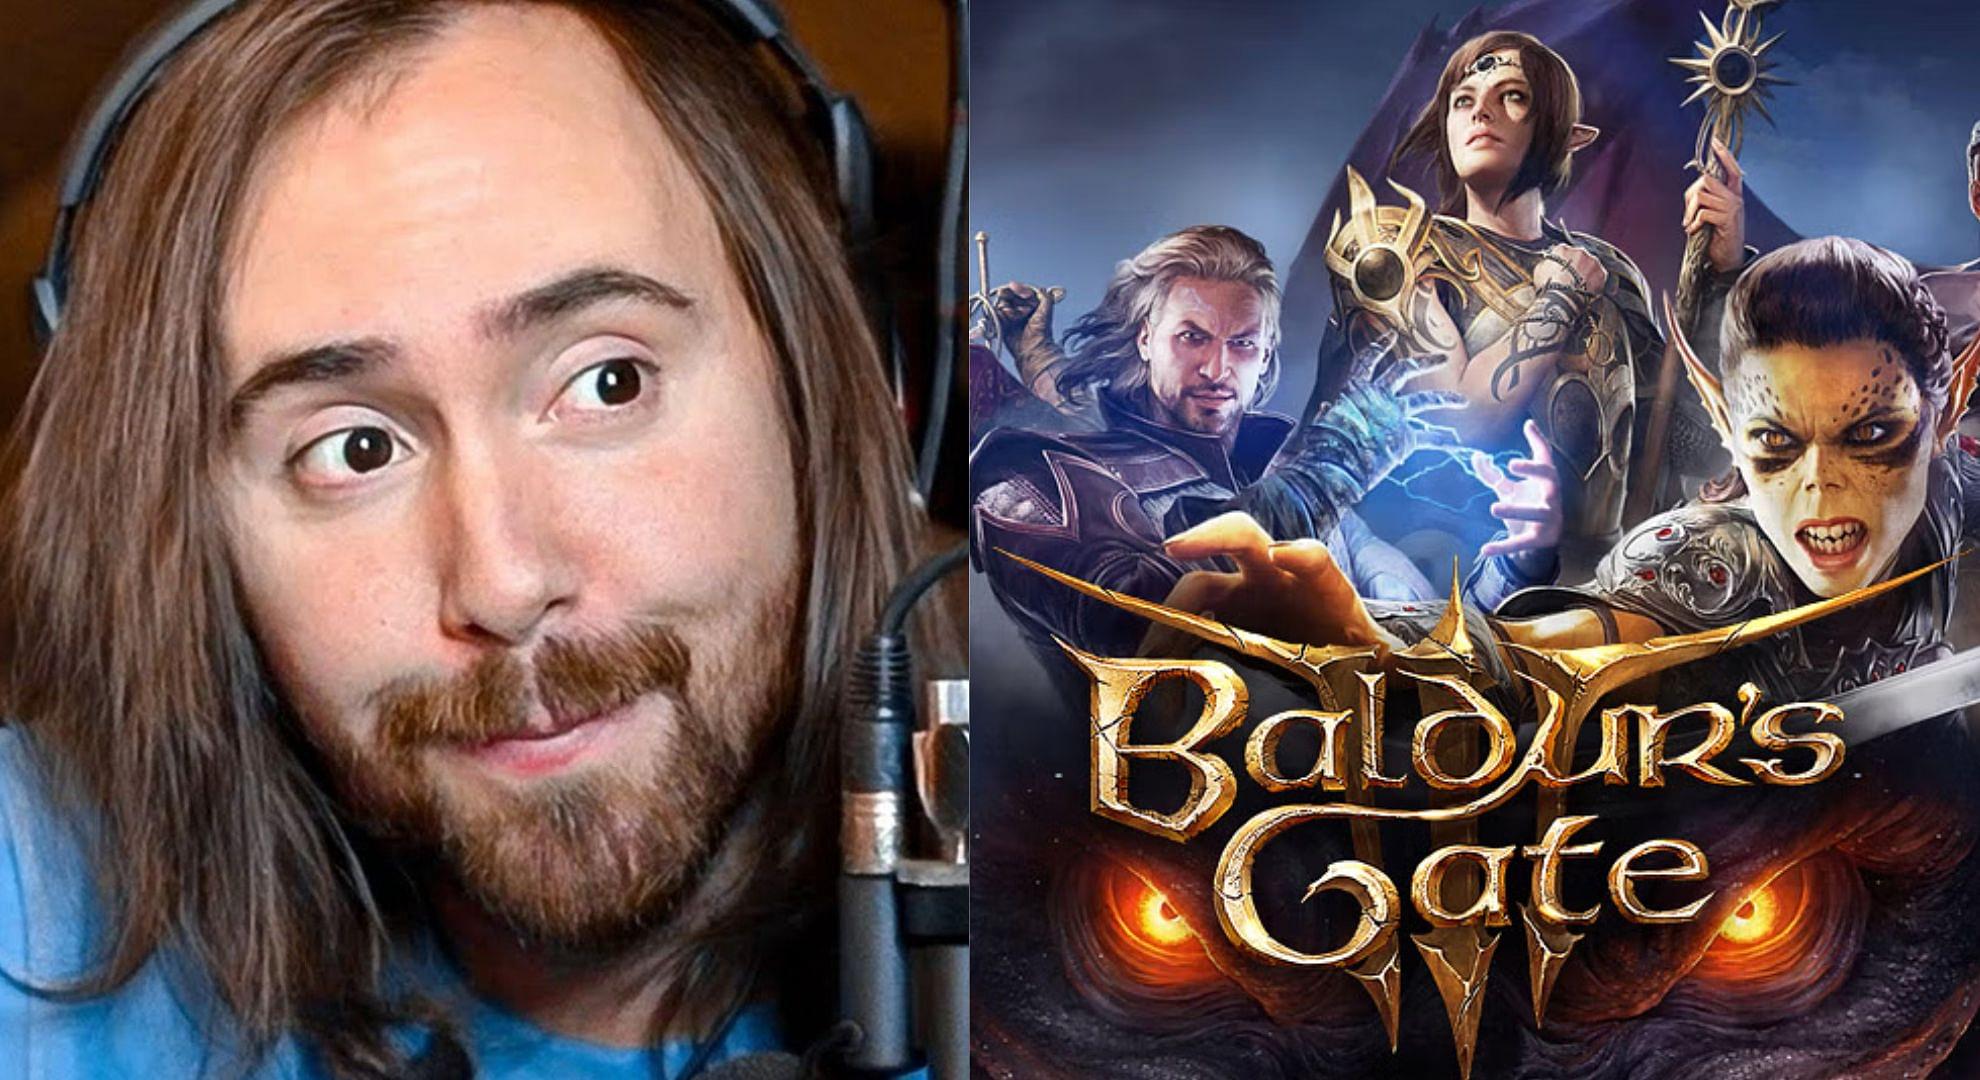 Asmongold speaks in support of the game Baldur's Gate 3